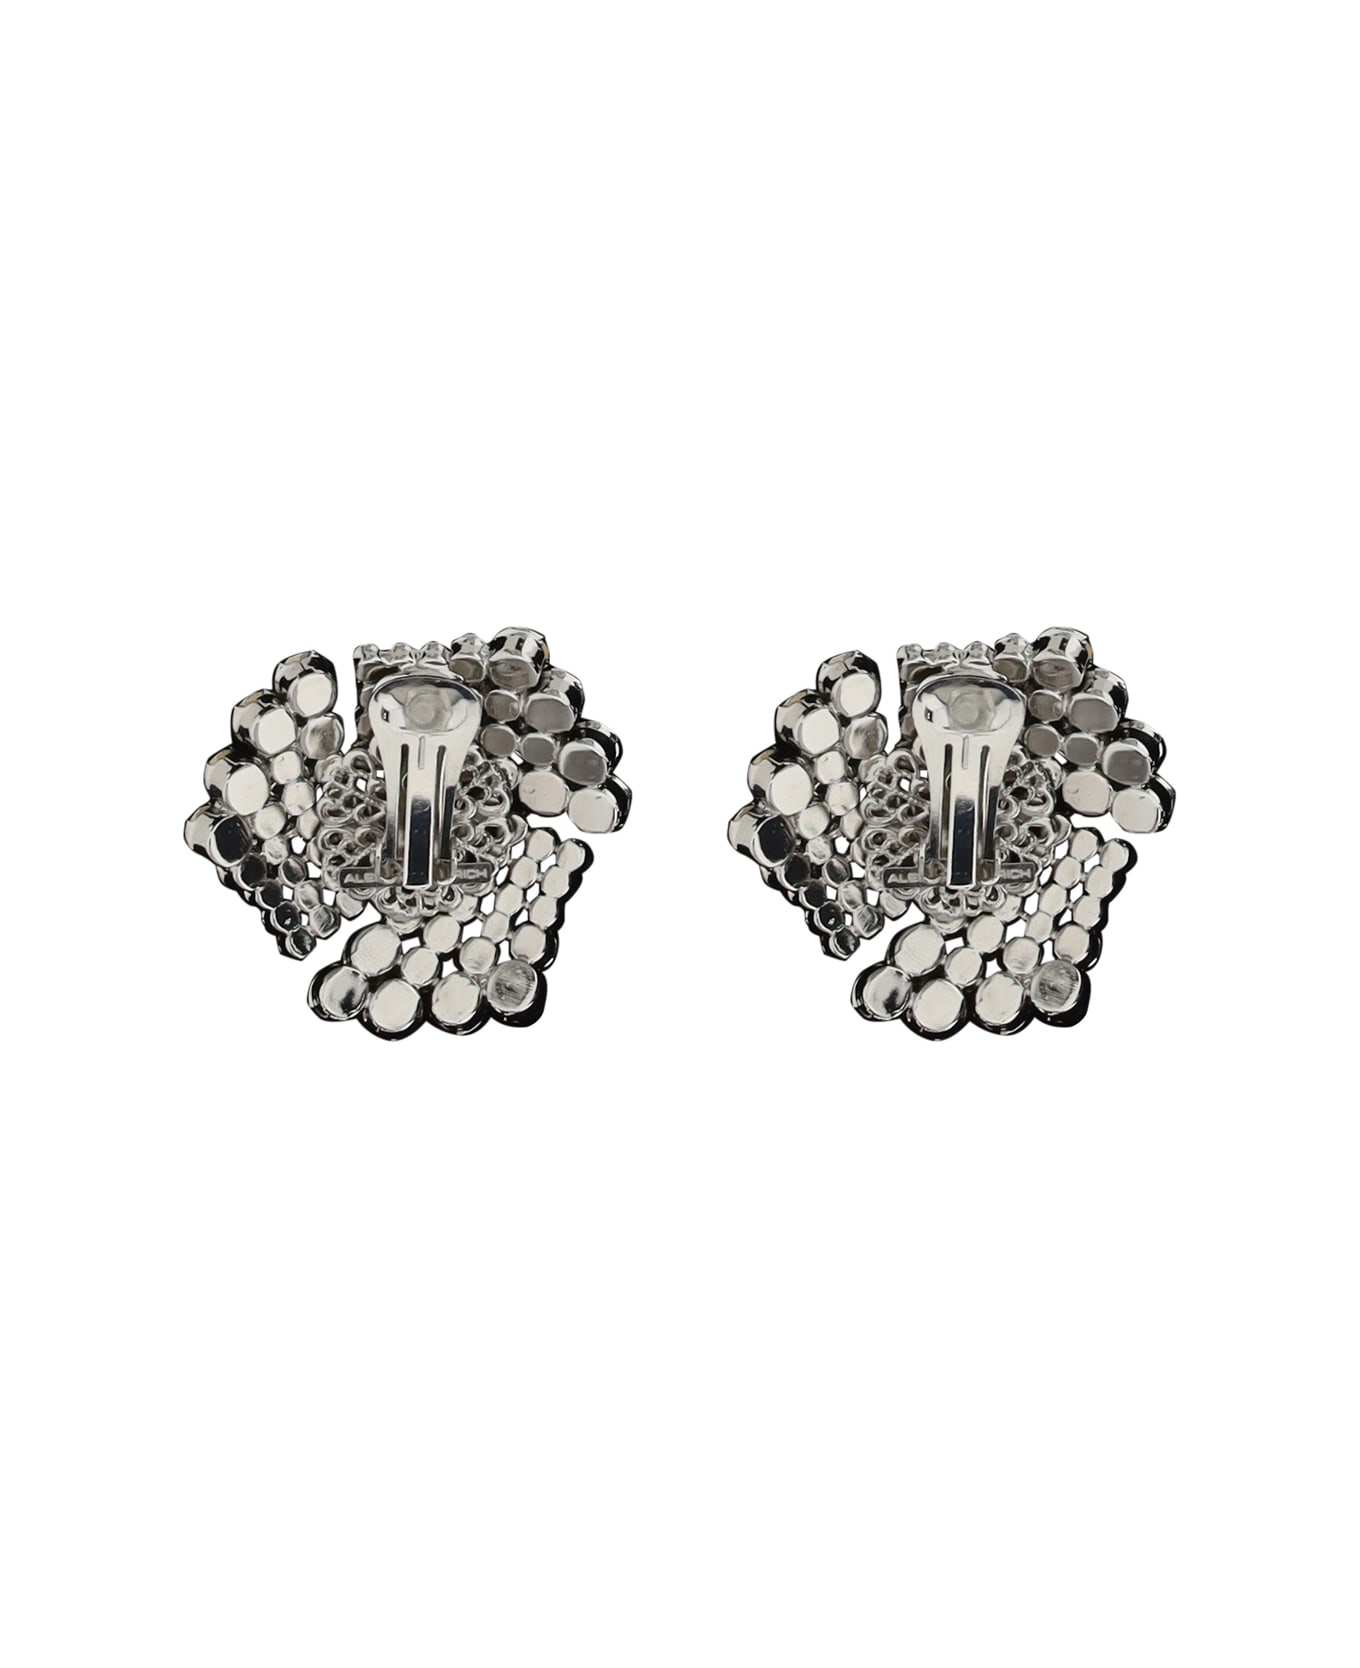 Alessandra Rich Crystal Earrings - Cry-silver